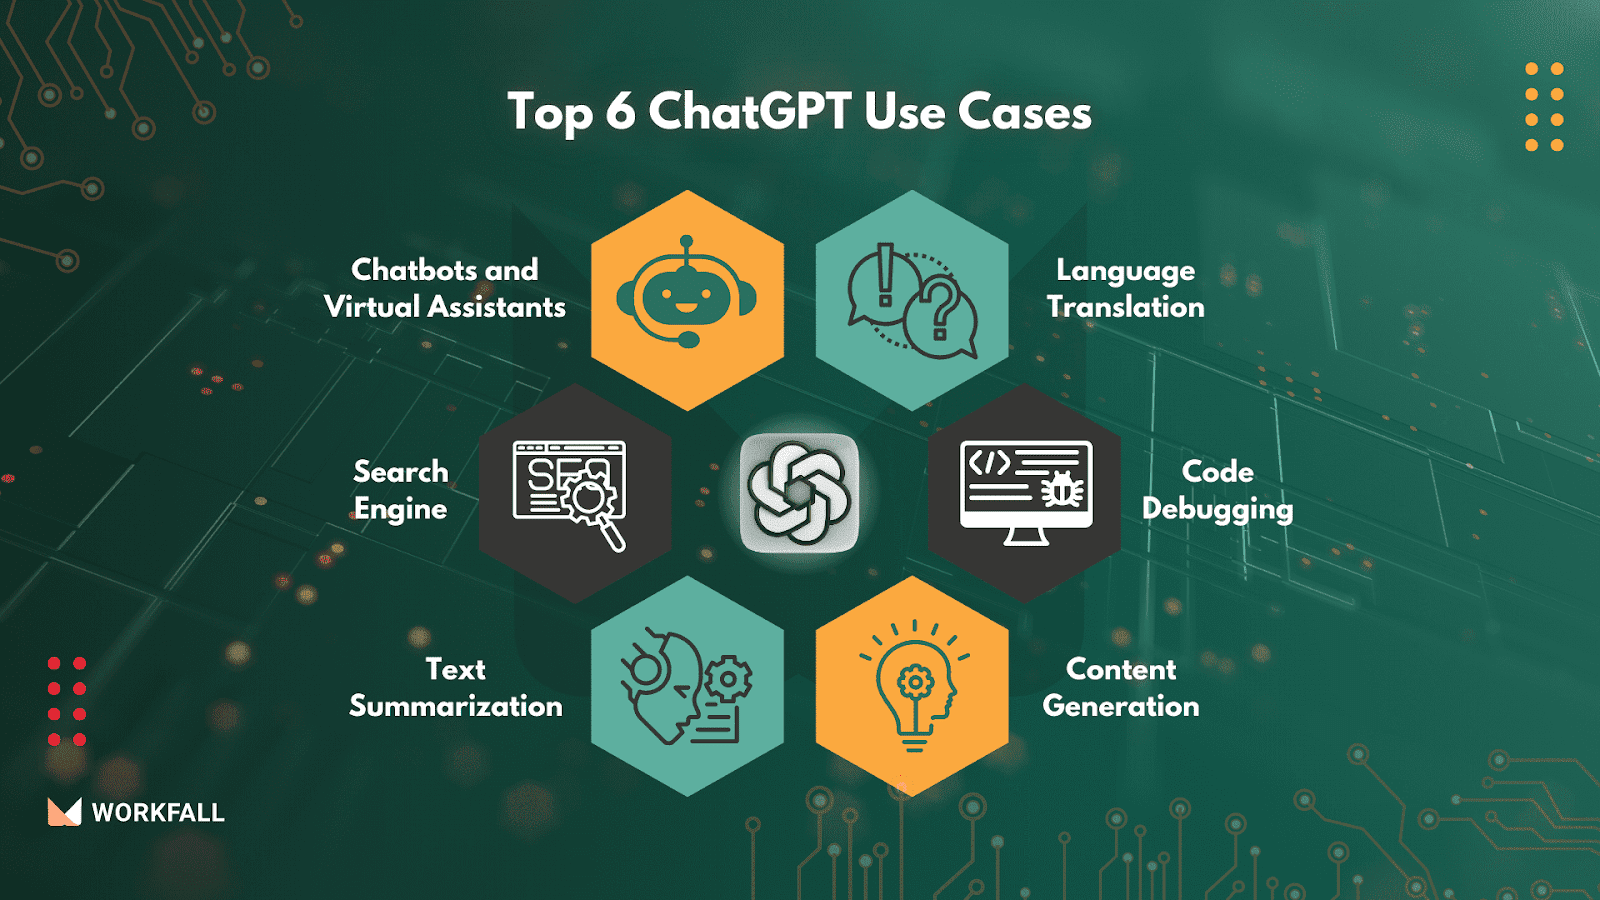 Top 6 ChatGPT Use Cases